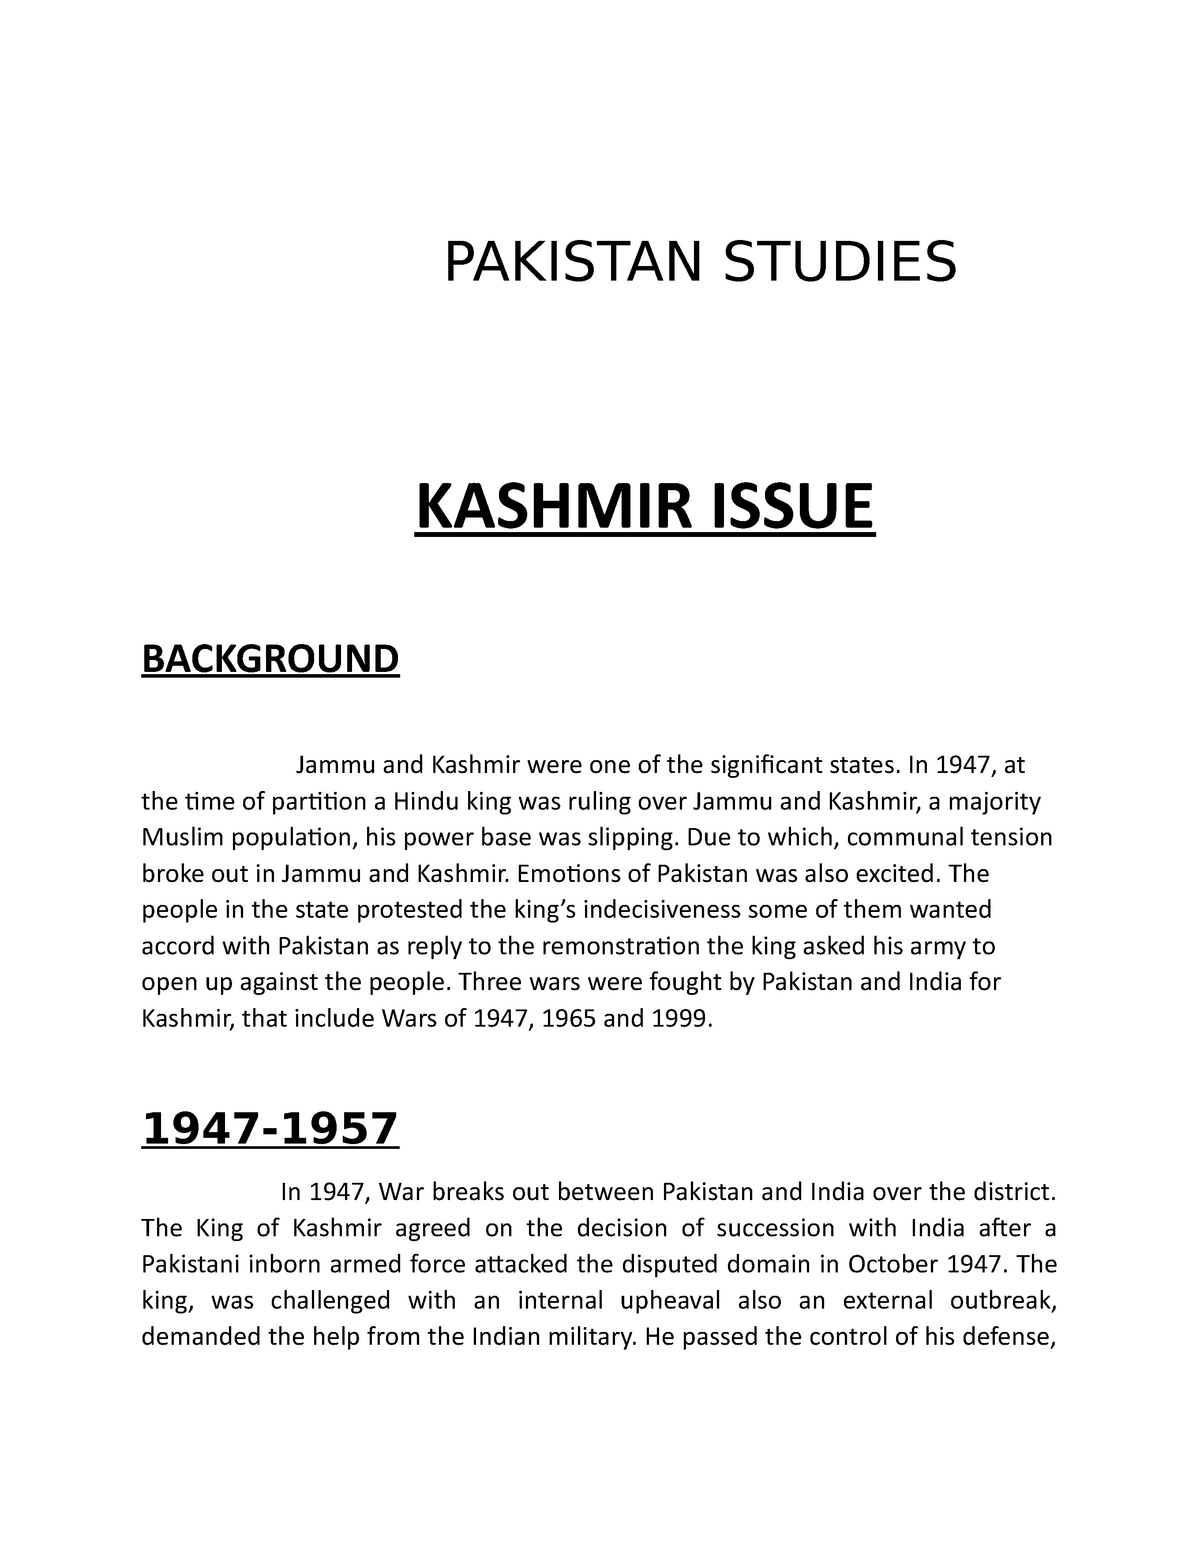 essay on topic kashmir issue